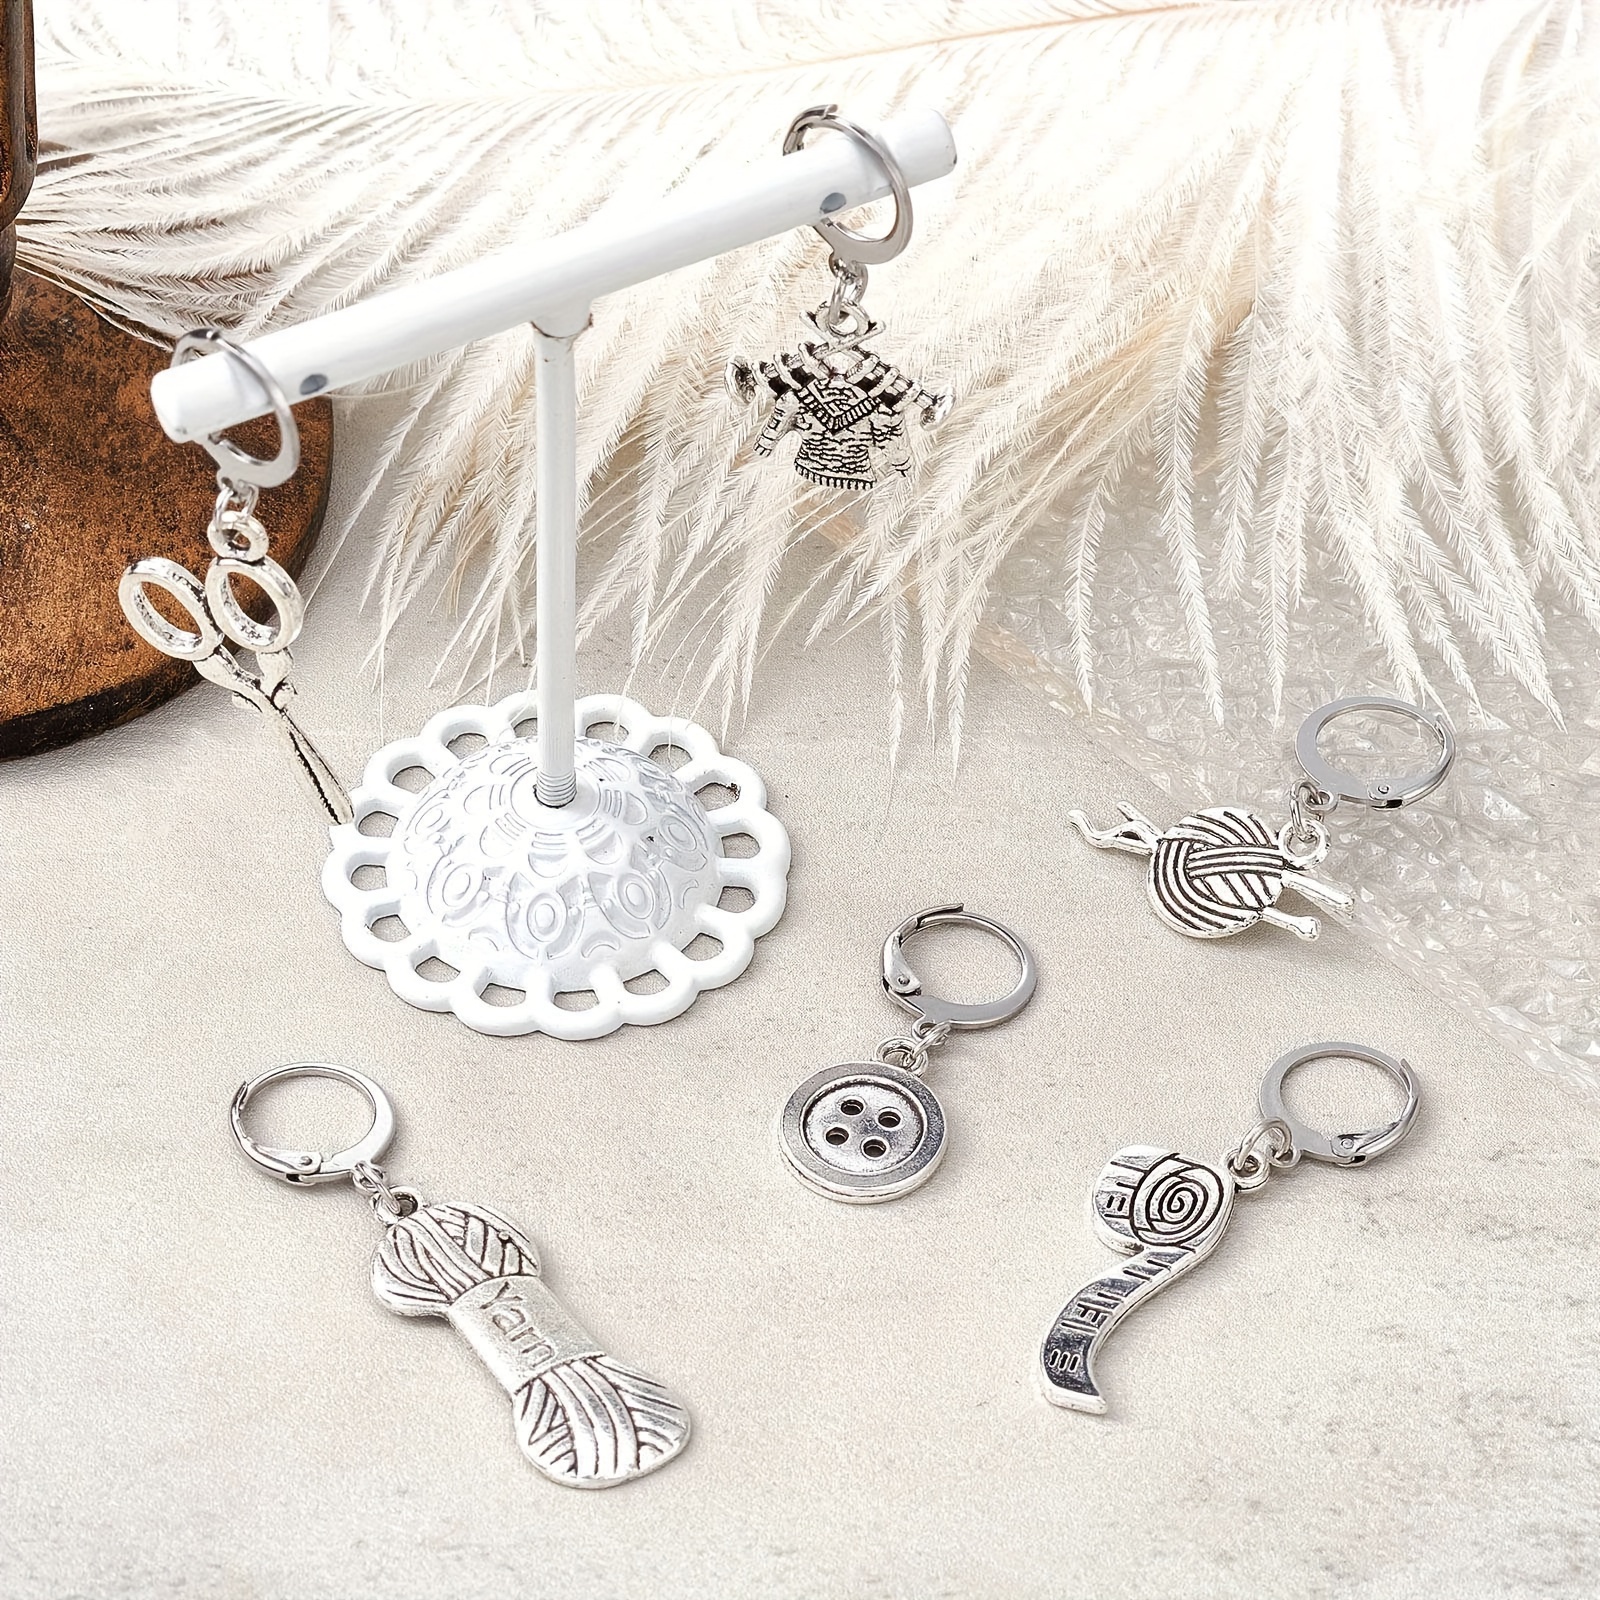 6 Pcs Braided Ring Crochet Rings for Crocheting Ancient Silver